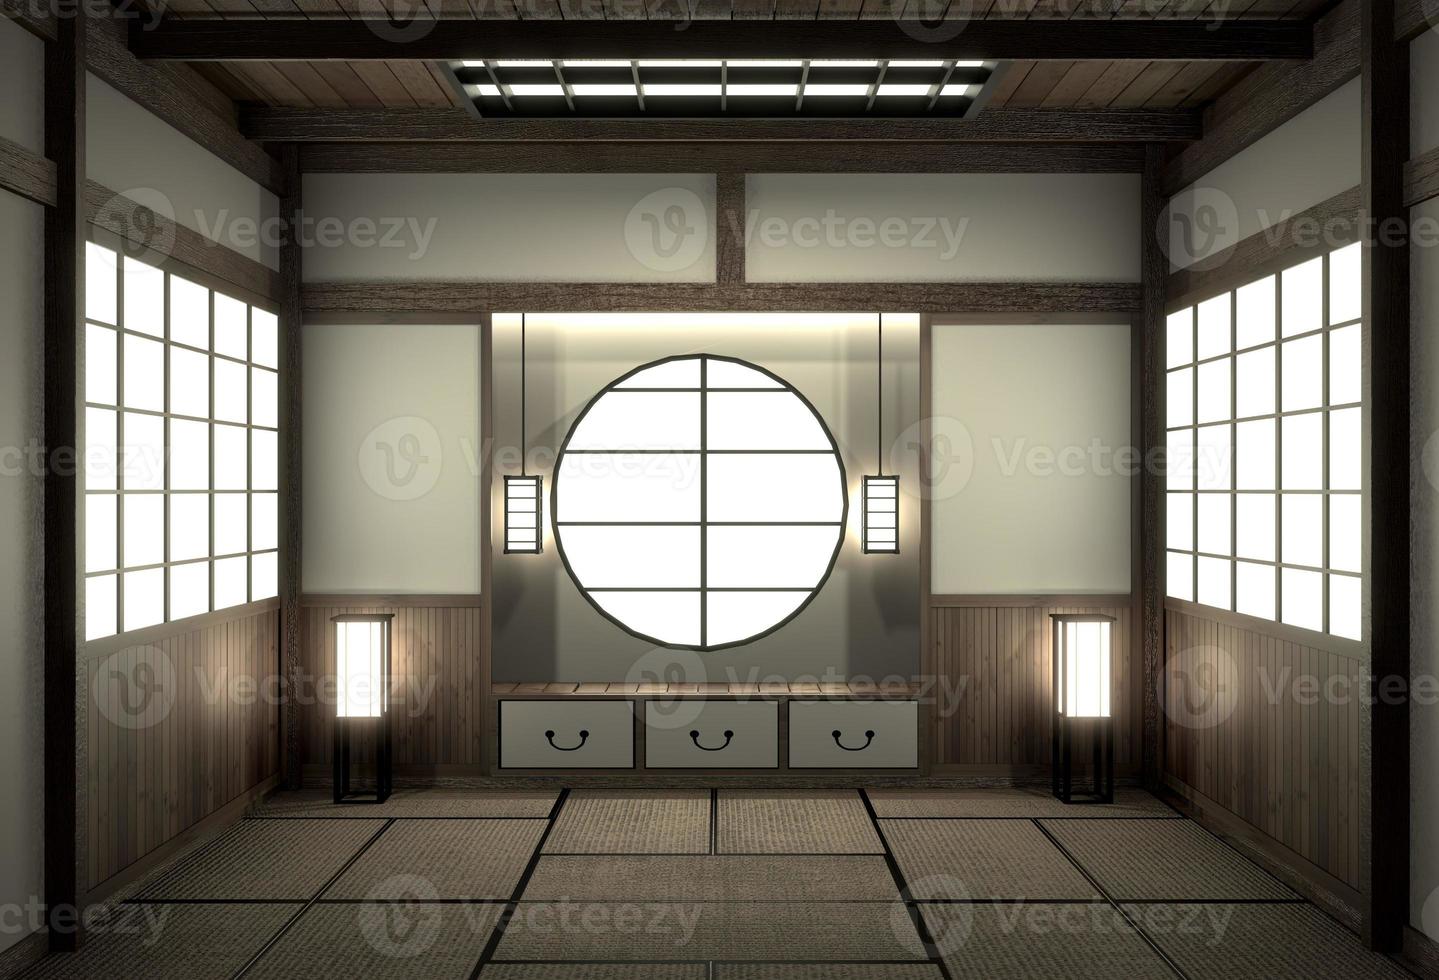 Living room interior design with cabinet in shelf wall design and decoration japan style.3D rendering photo